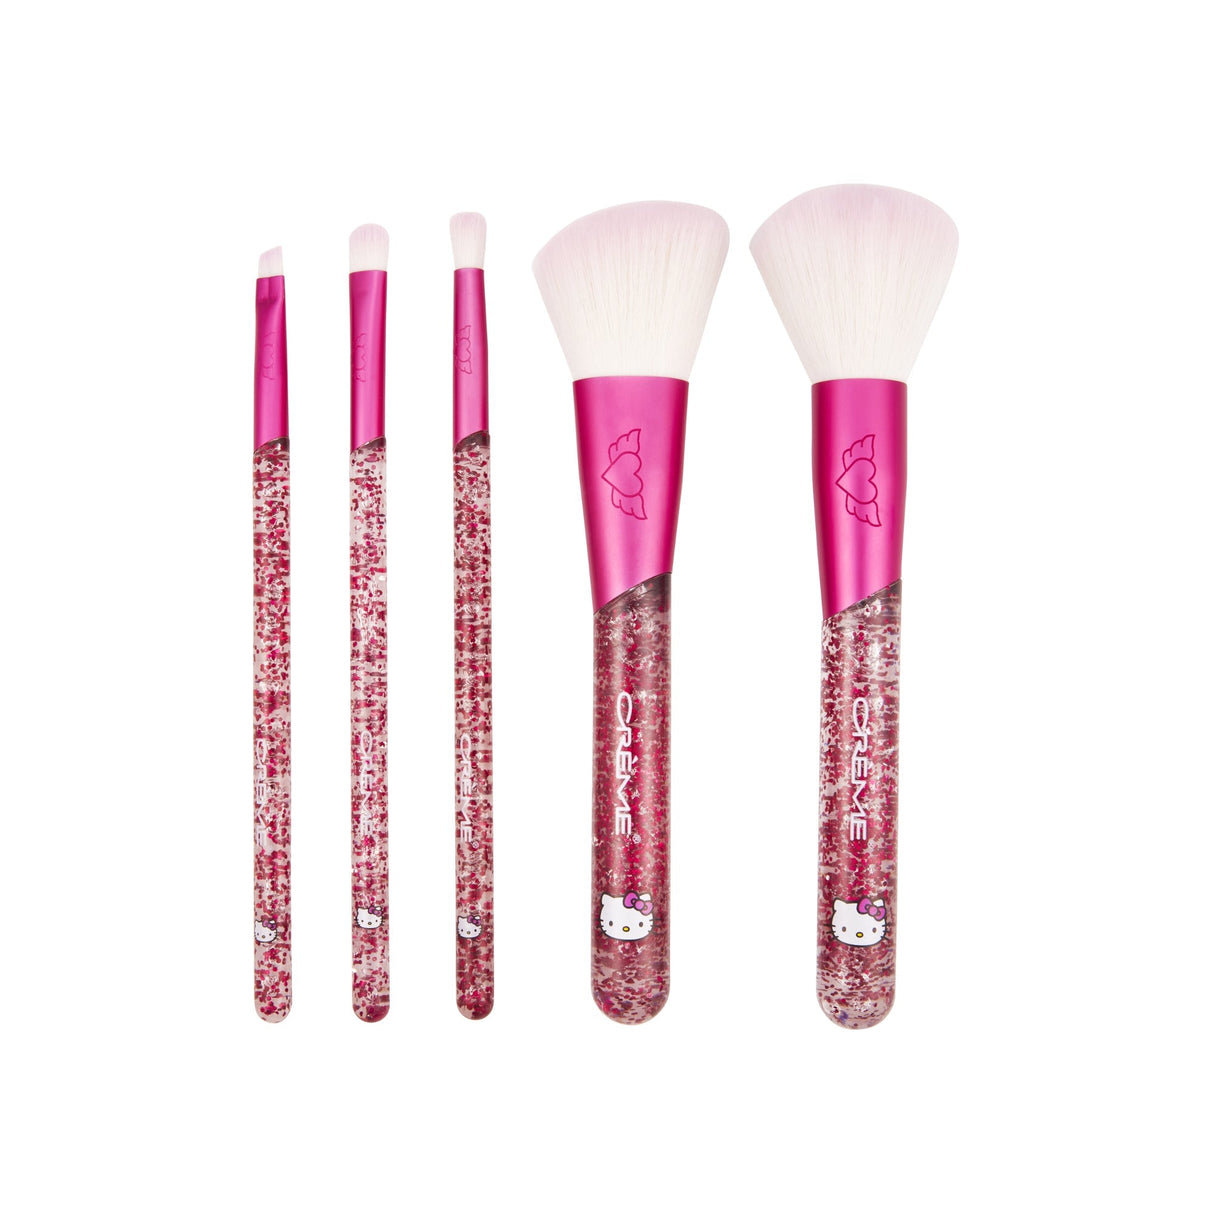 THE CREME SHOP - HELLO KITTY LUV WAVE BRUSH COLLECTION SET OF 5 (1 SET)